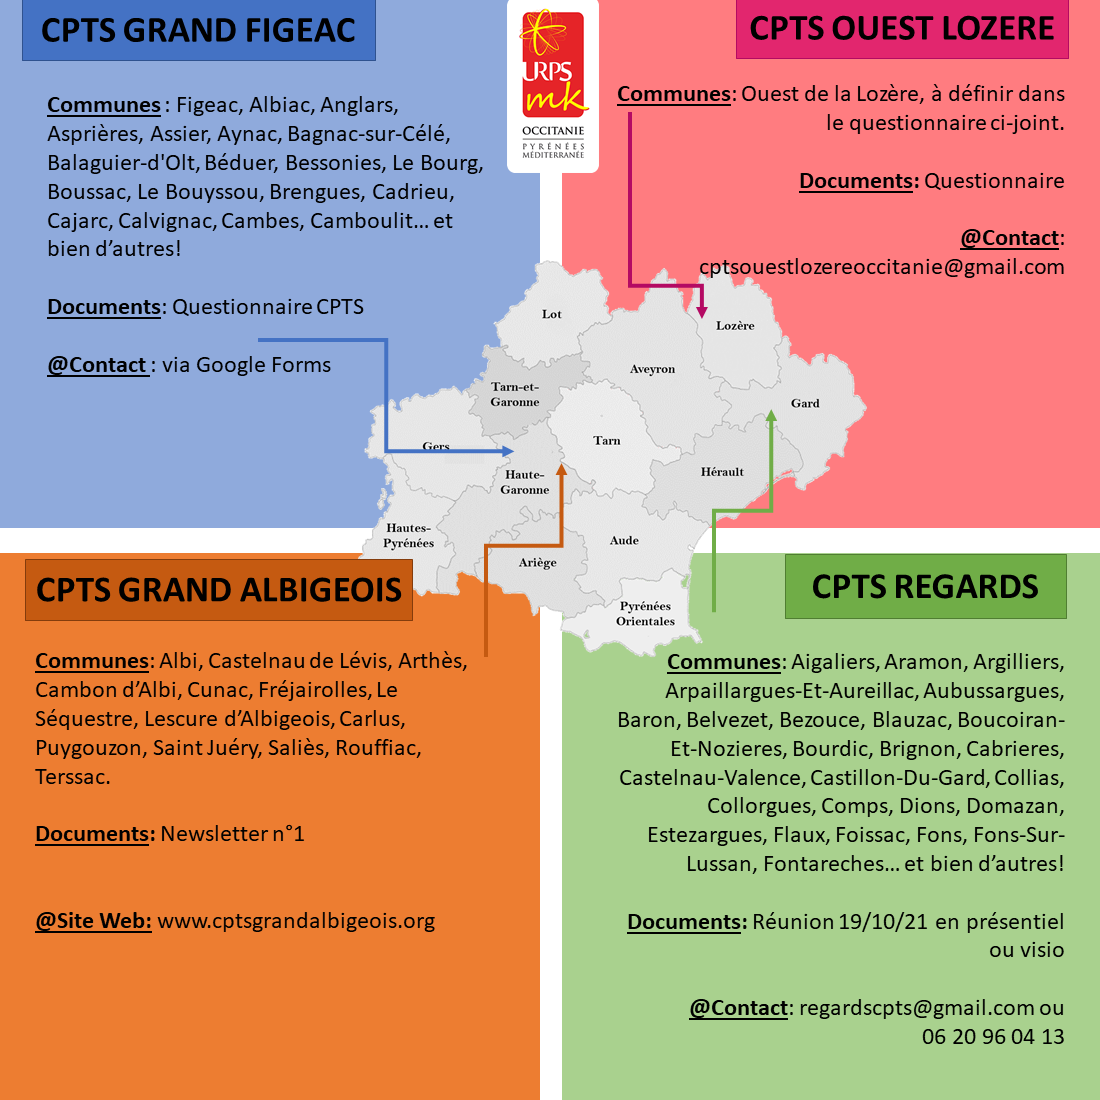 Cpts infographie octobre grand figeac ouest lozsre albigeois regards